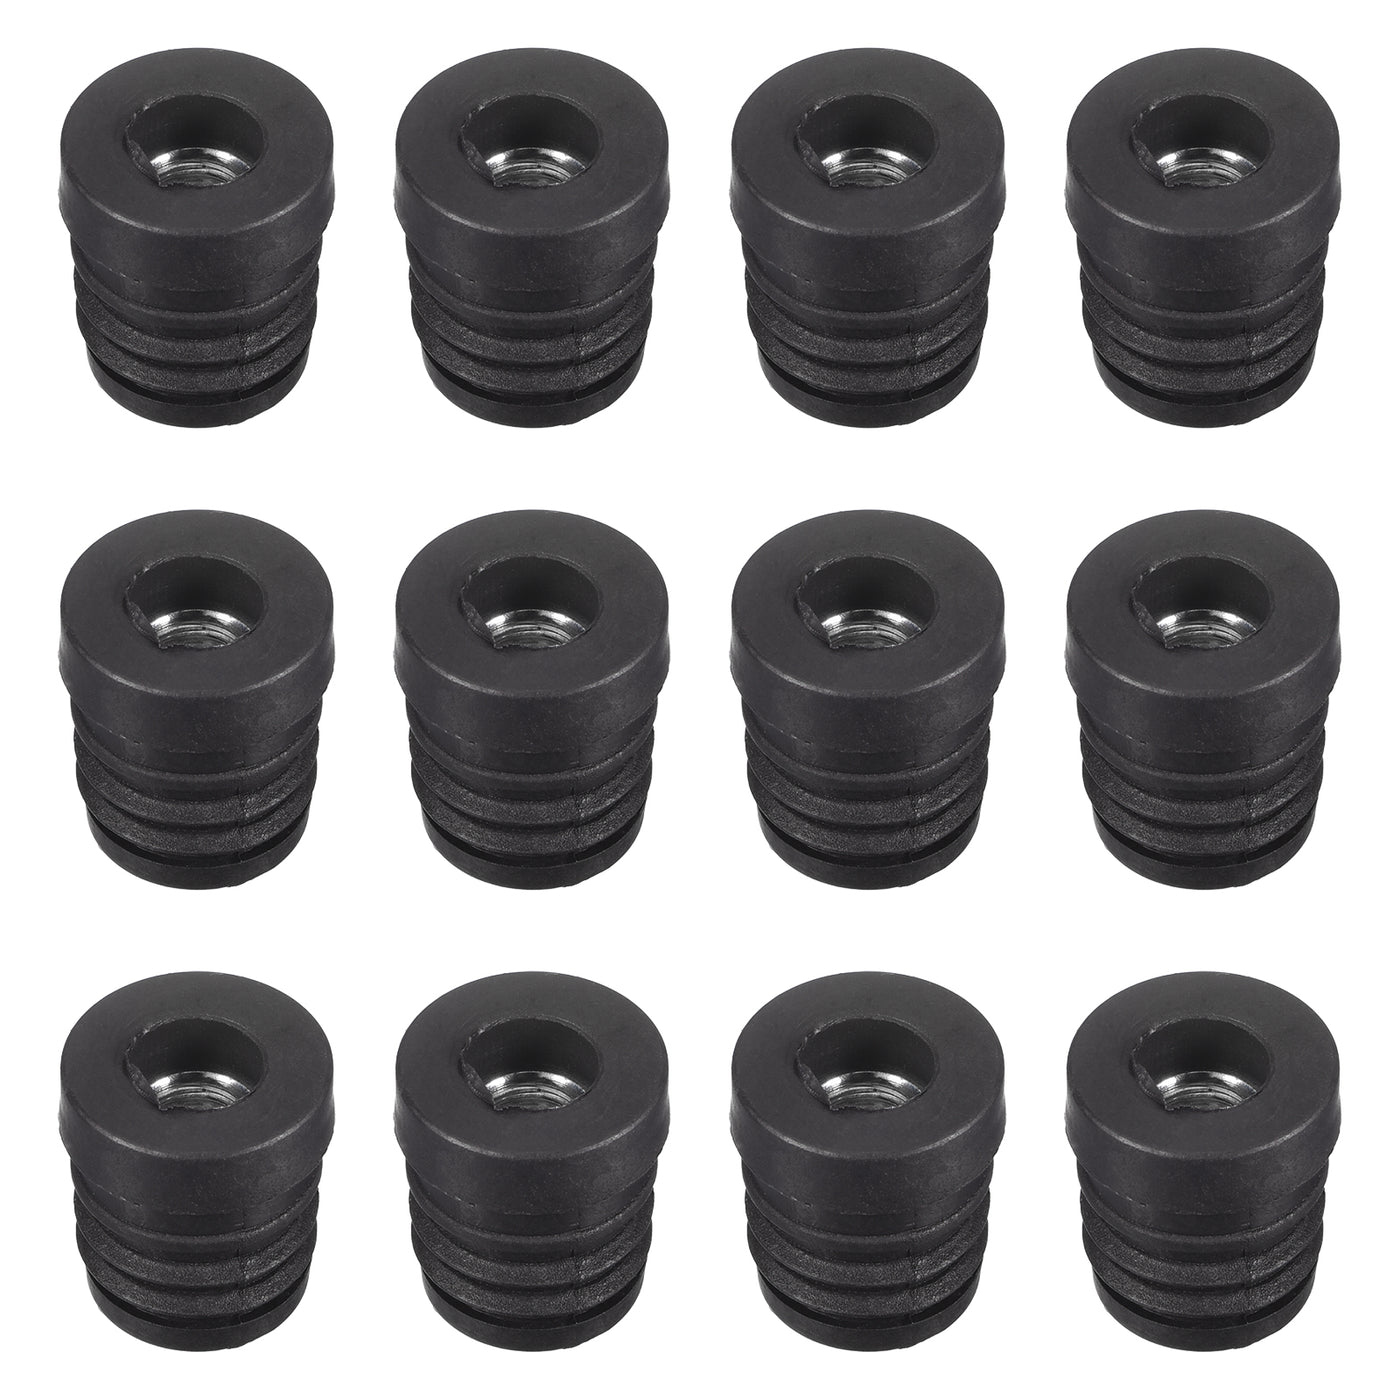 uxcell Uxcell 12Pcs 19mm/0.75" Caster Insert with Thread, Round M8 Thread for Furniture